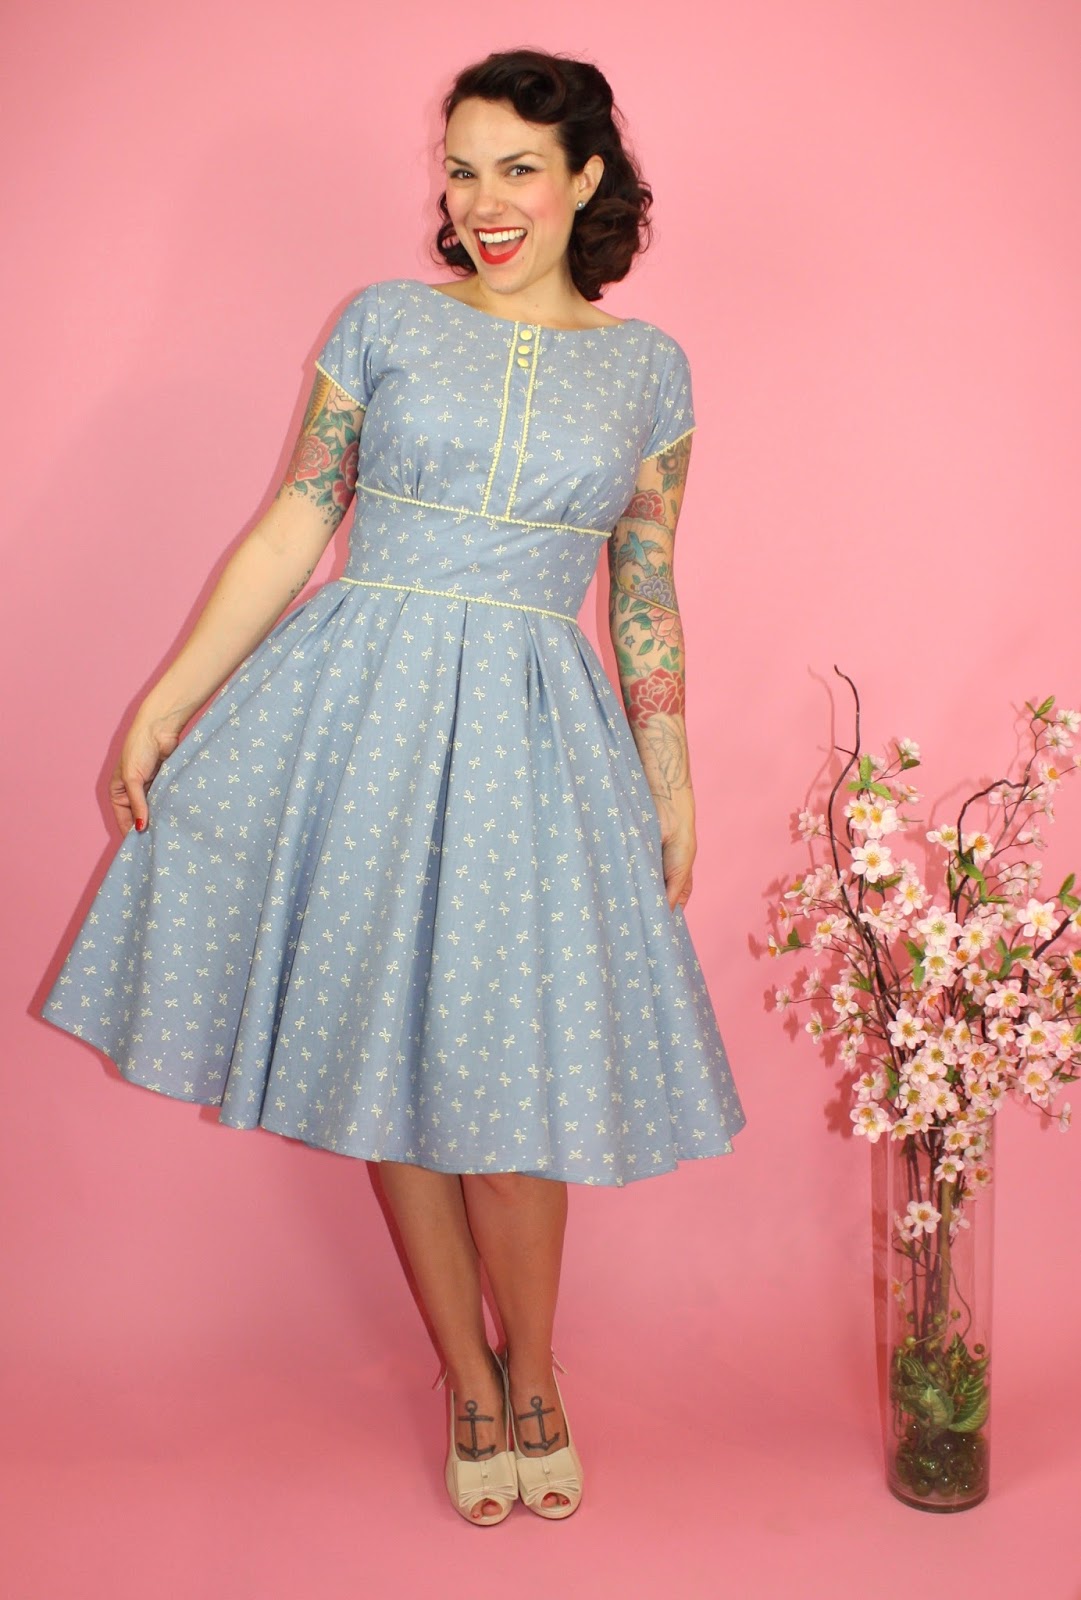 Gertie's New Blog for Better Sewing: Chambray Bow Day Dress